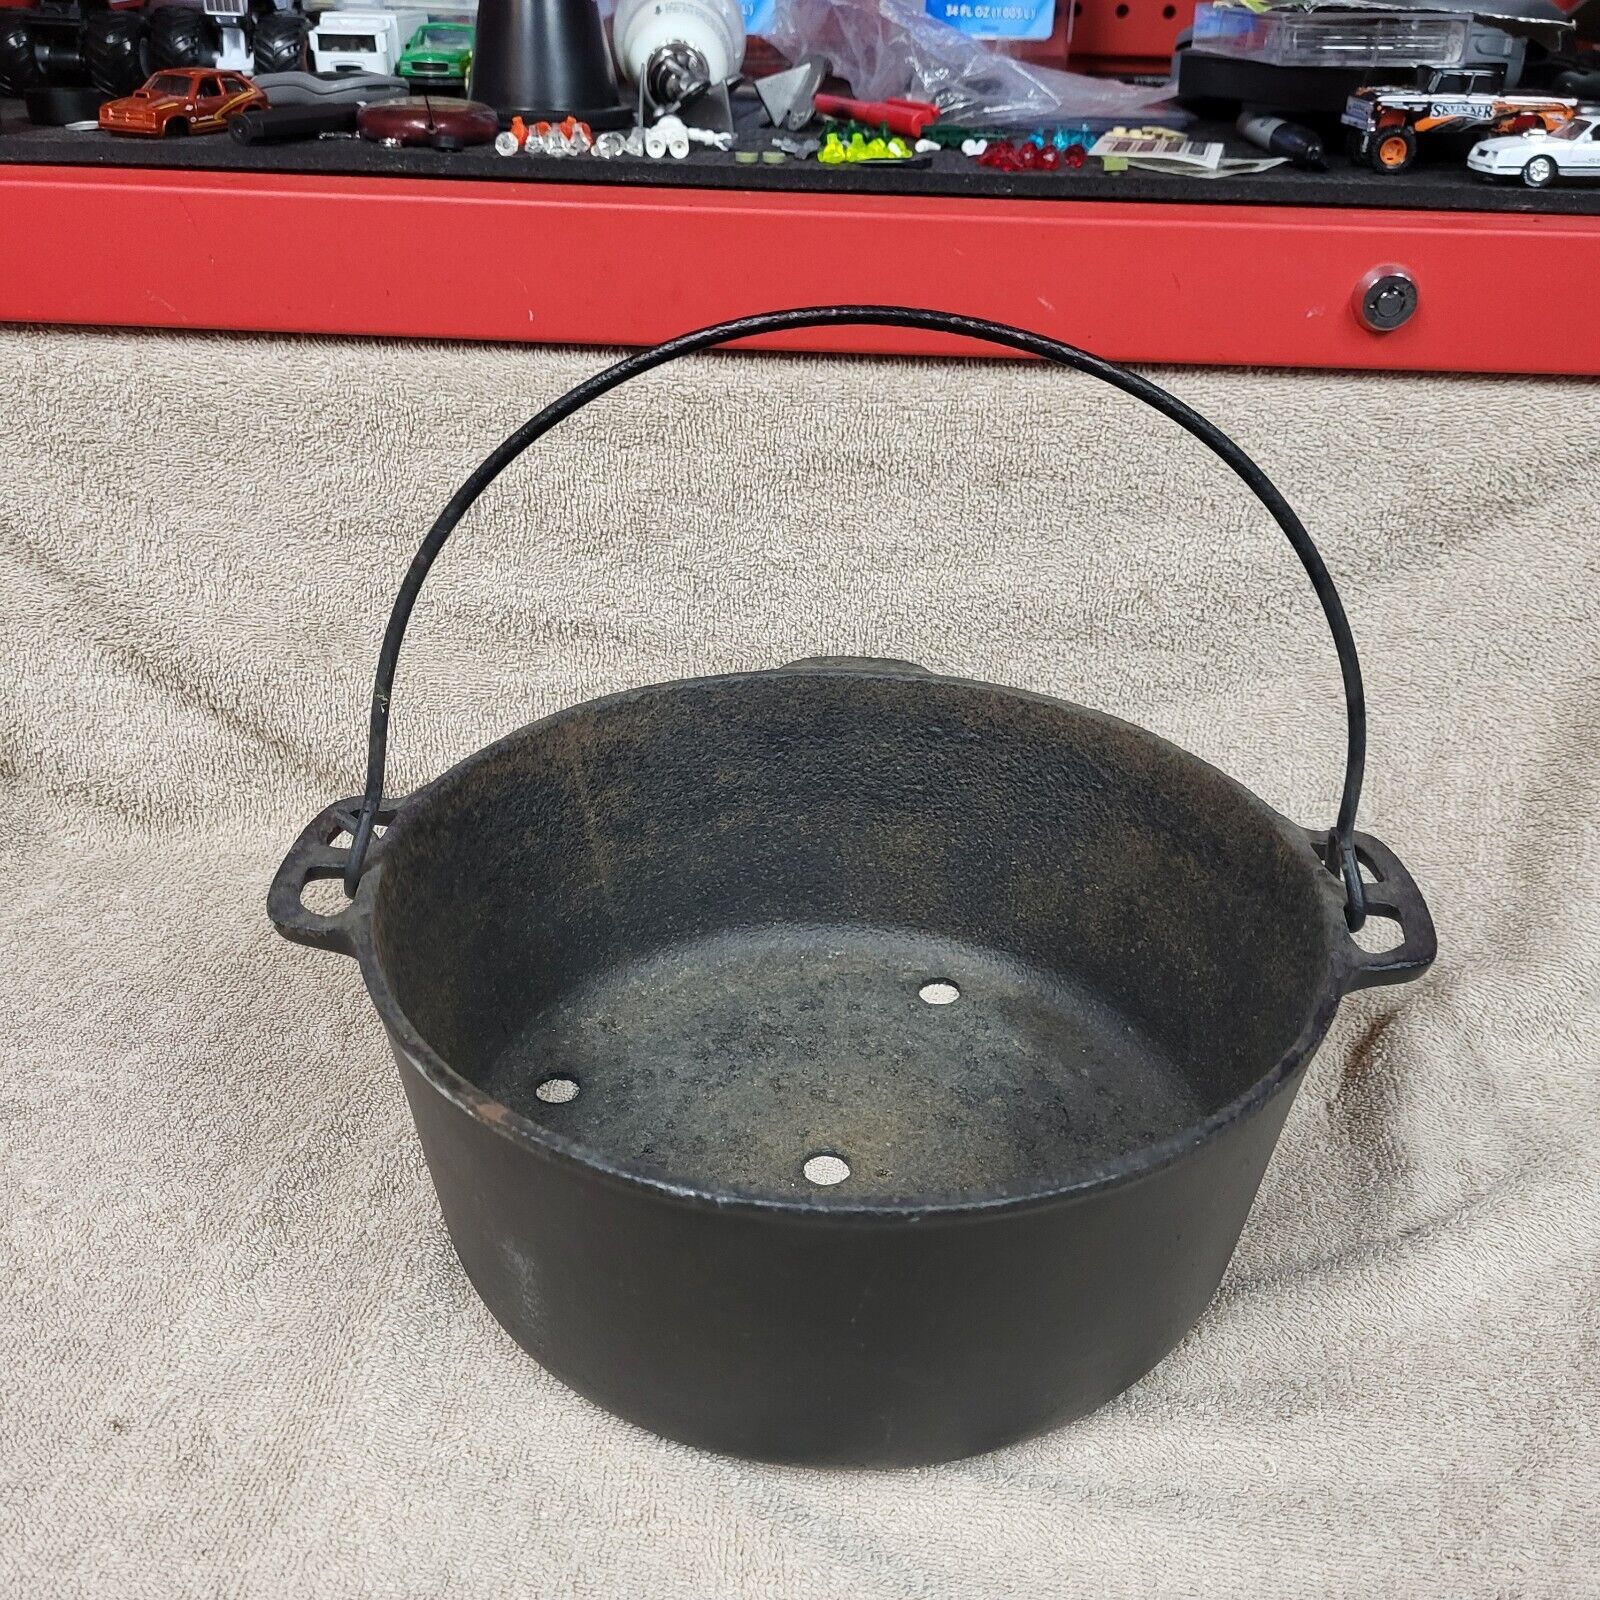 Wagner Ware Cast Iron Pot 1268 D No. 8 With Drain Holes.